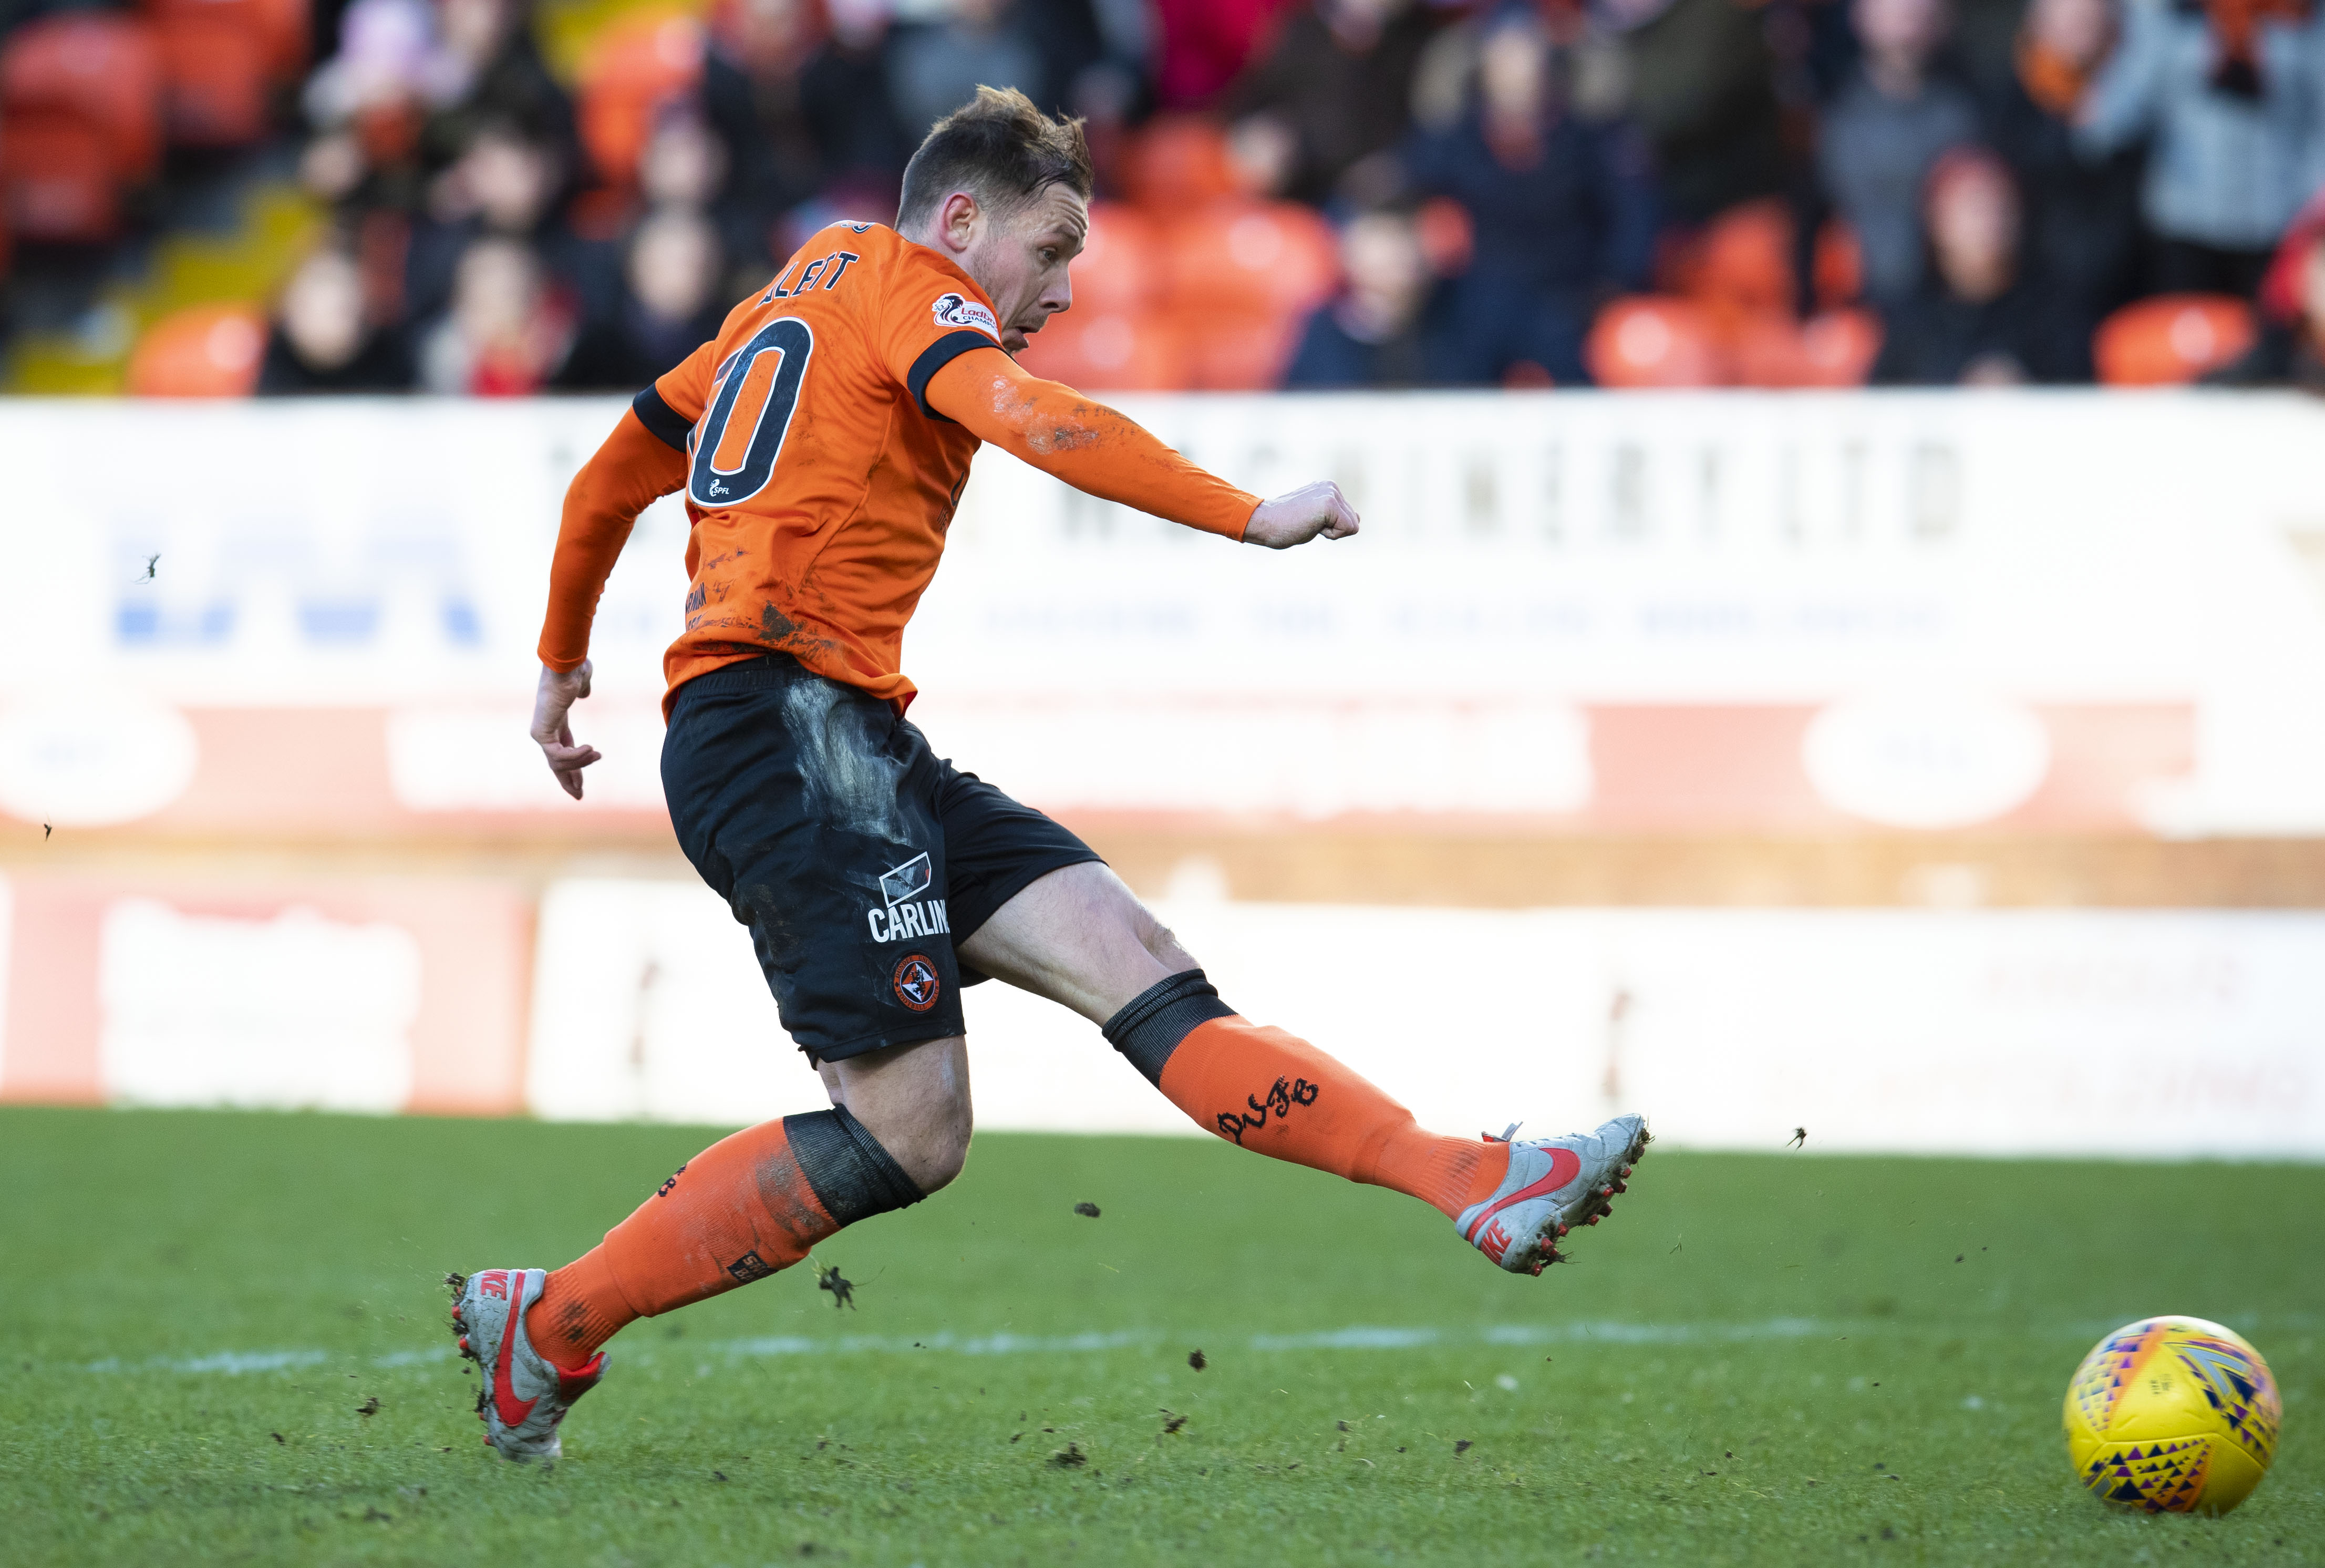 Dundee United's Peter Pawlett puts his side 2-0 ahead.